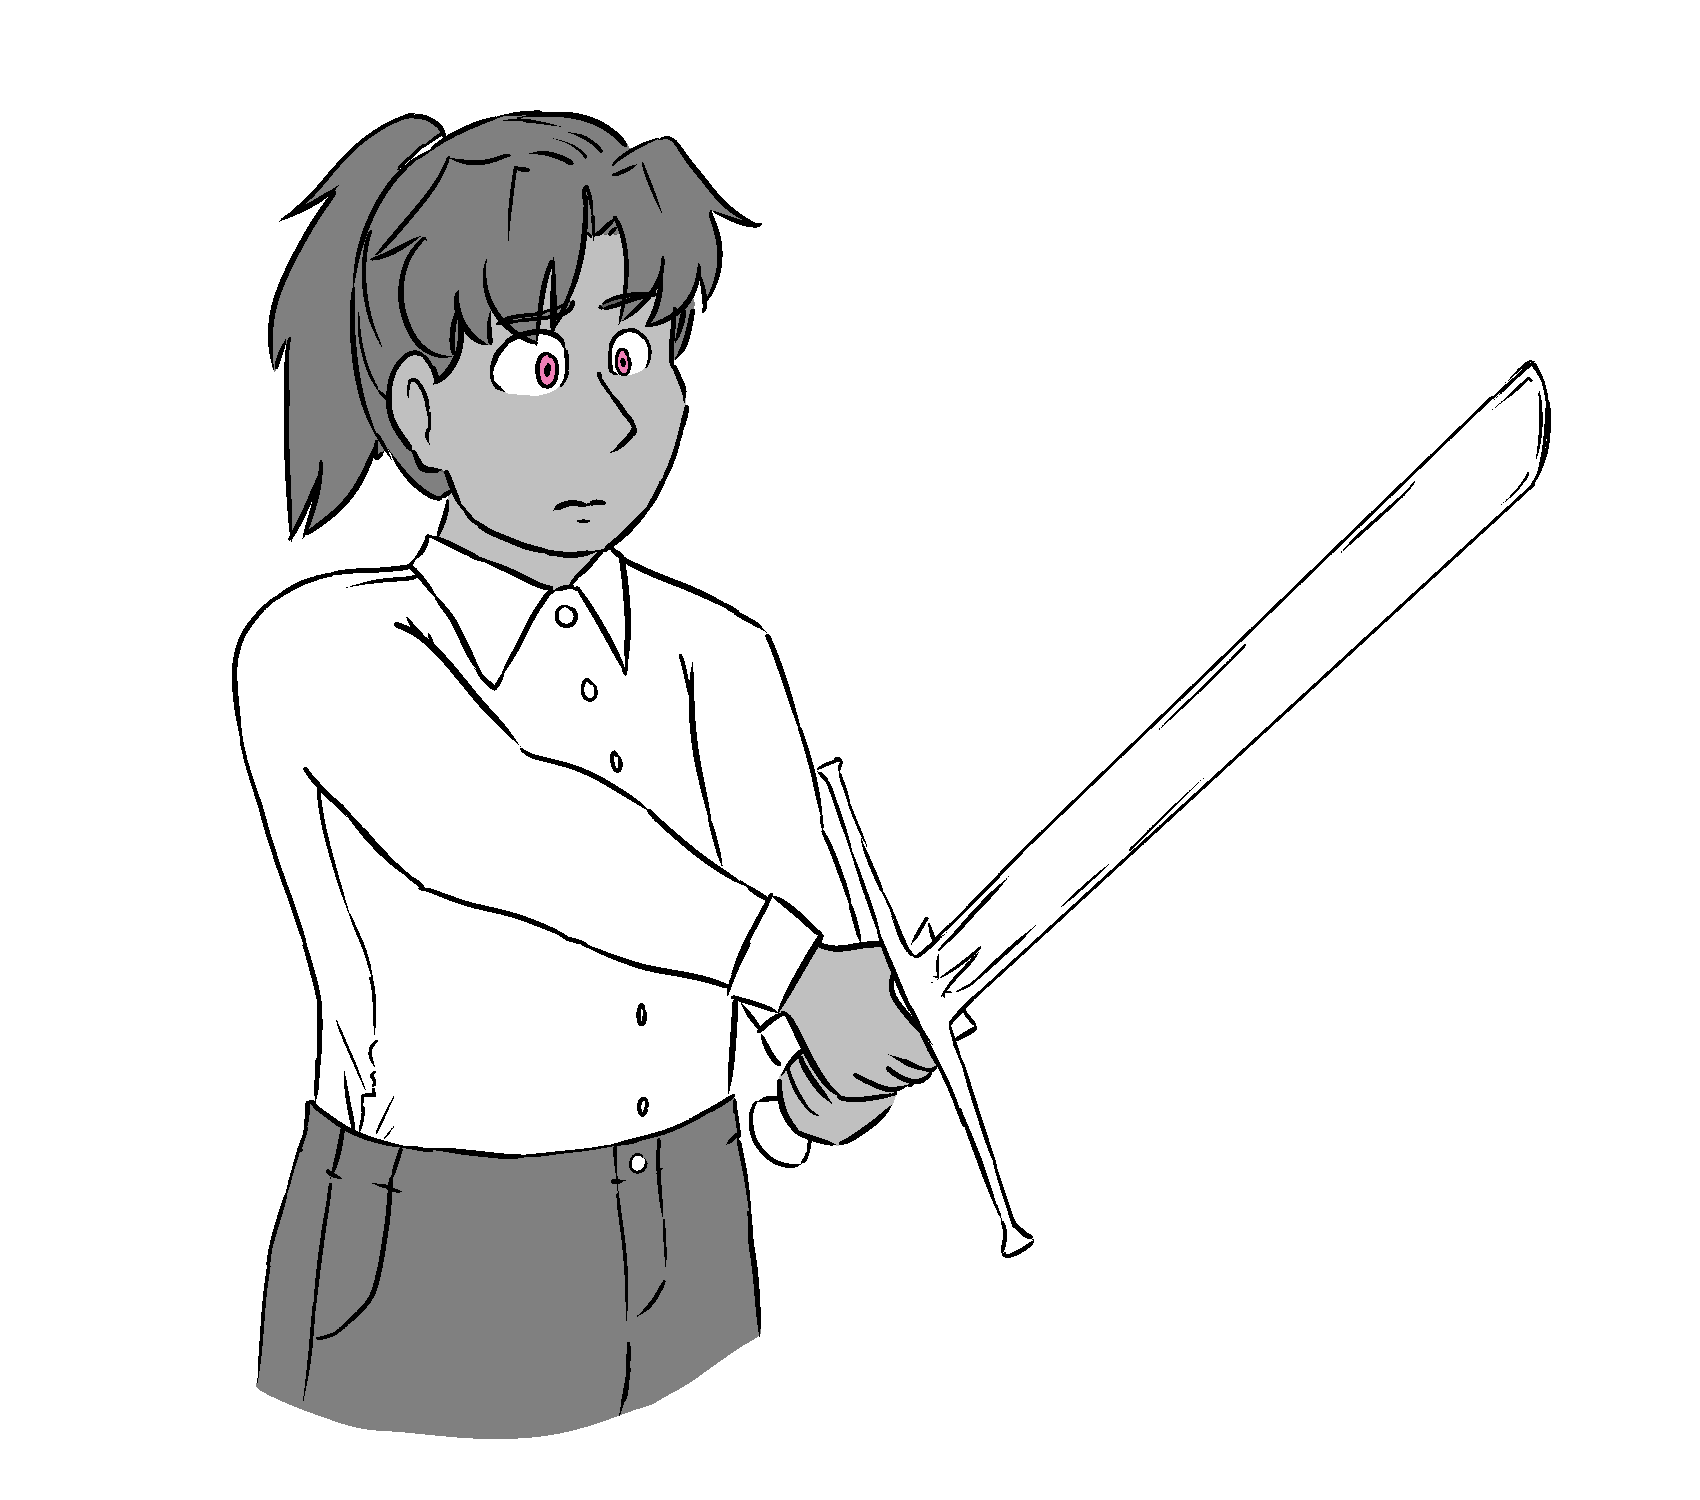 A greyscale drawing of a woman with a sword. Her eyes are colored a light magenta despite this. She is dressed in a button up and slacks, with her hair in a ponytail. She is holding a sword in front of her, but not confidently, almost like she doesn't know what to do with it.